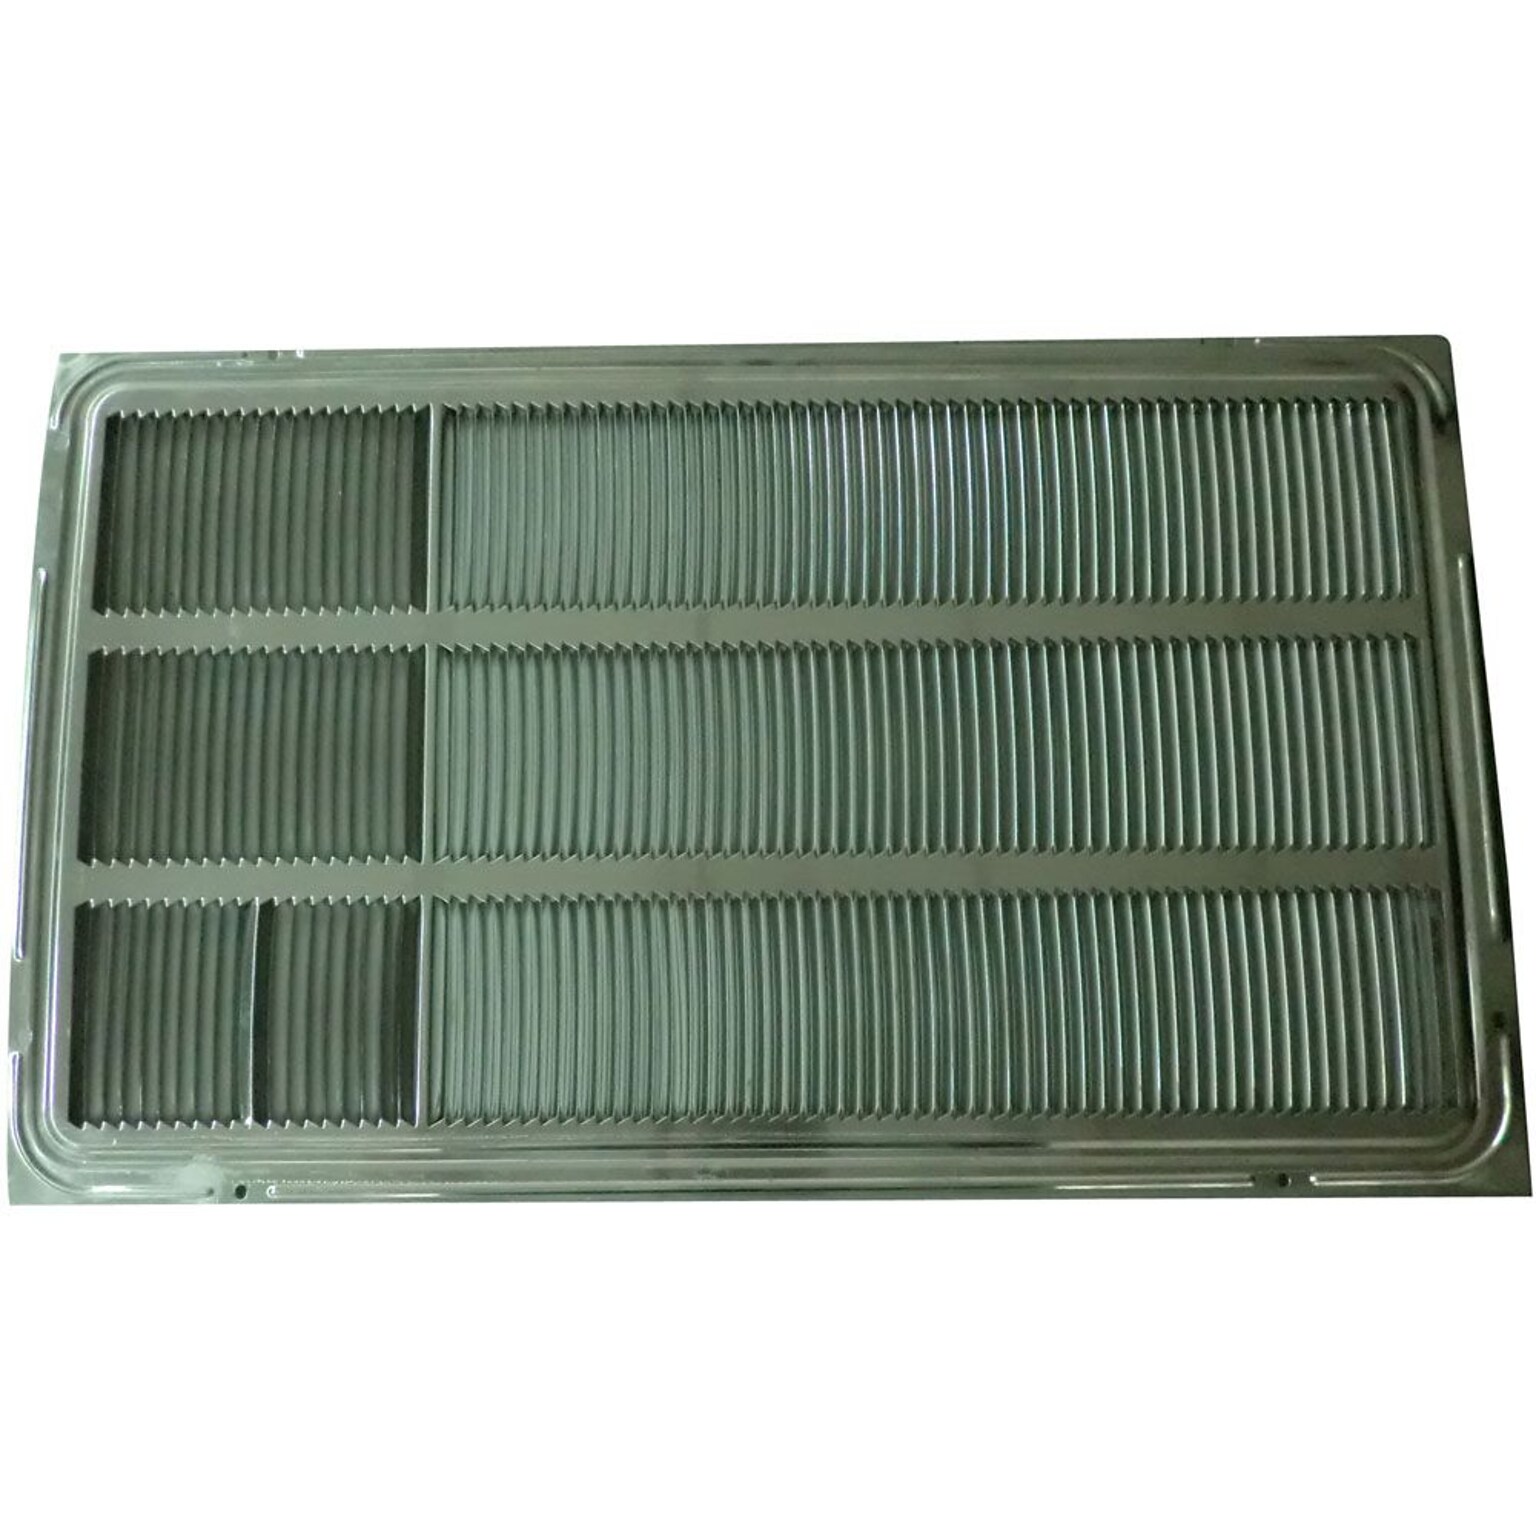 LG Stamped Aluminum Rear Architectural Grille For 26 Wall Sleeve Thru-the-Wall Air Conditioner